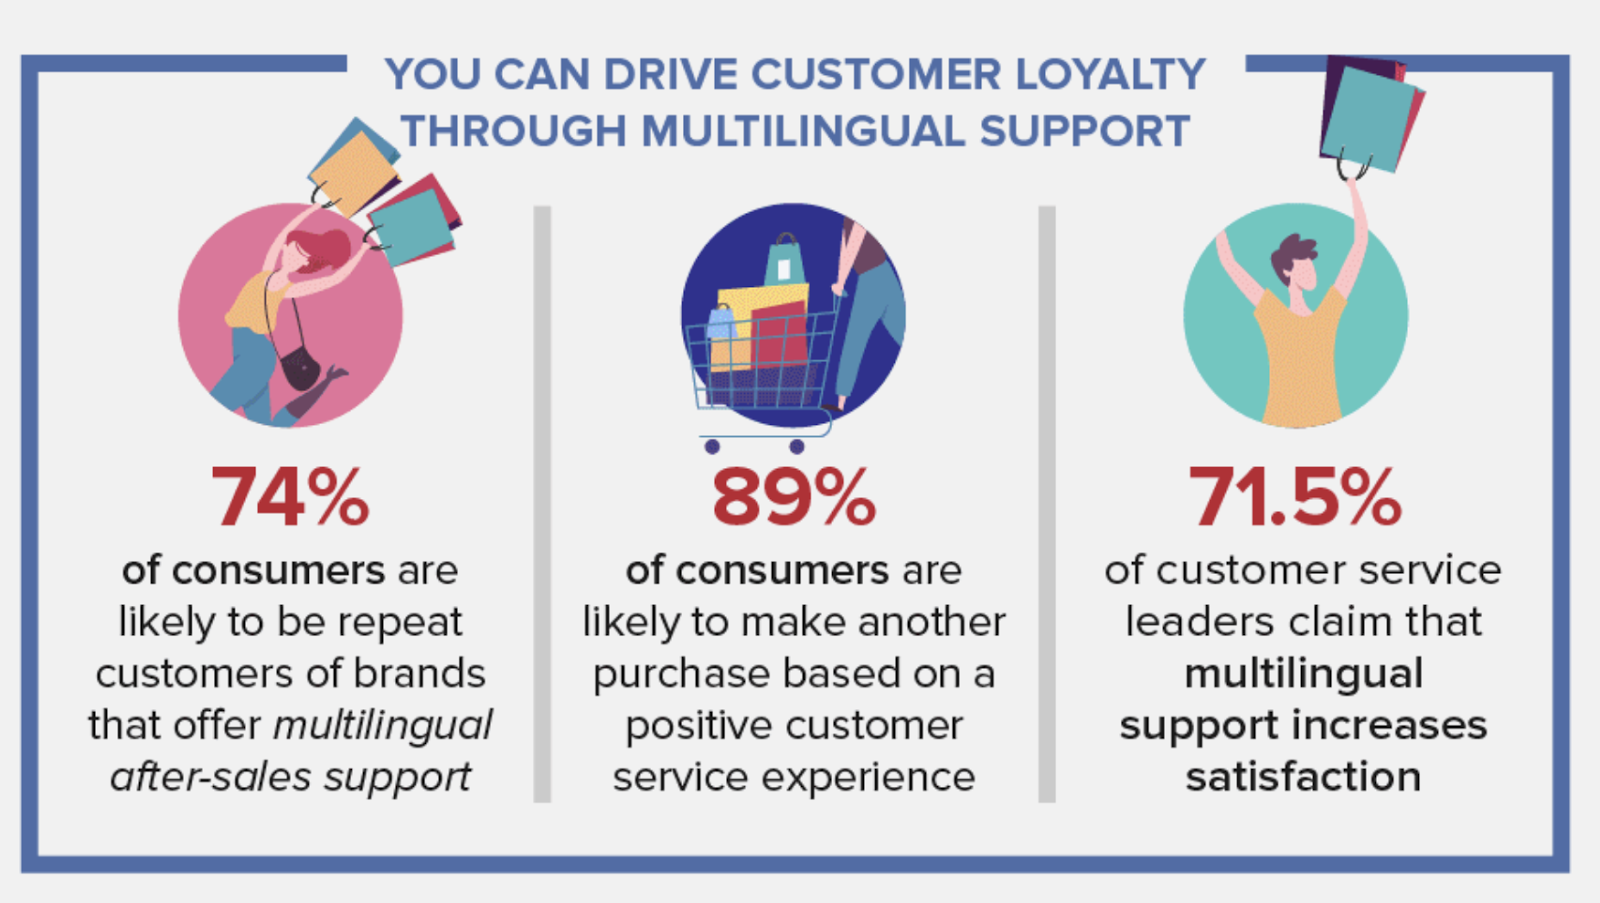 A customer loyalty infographic